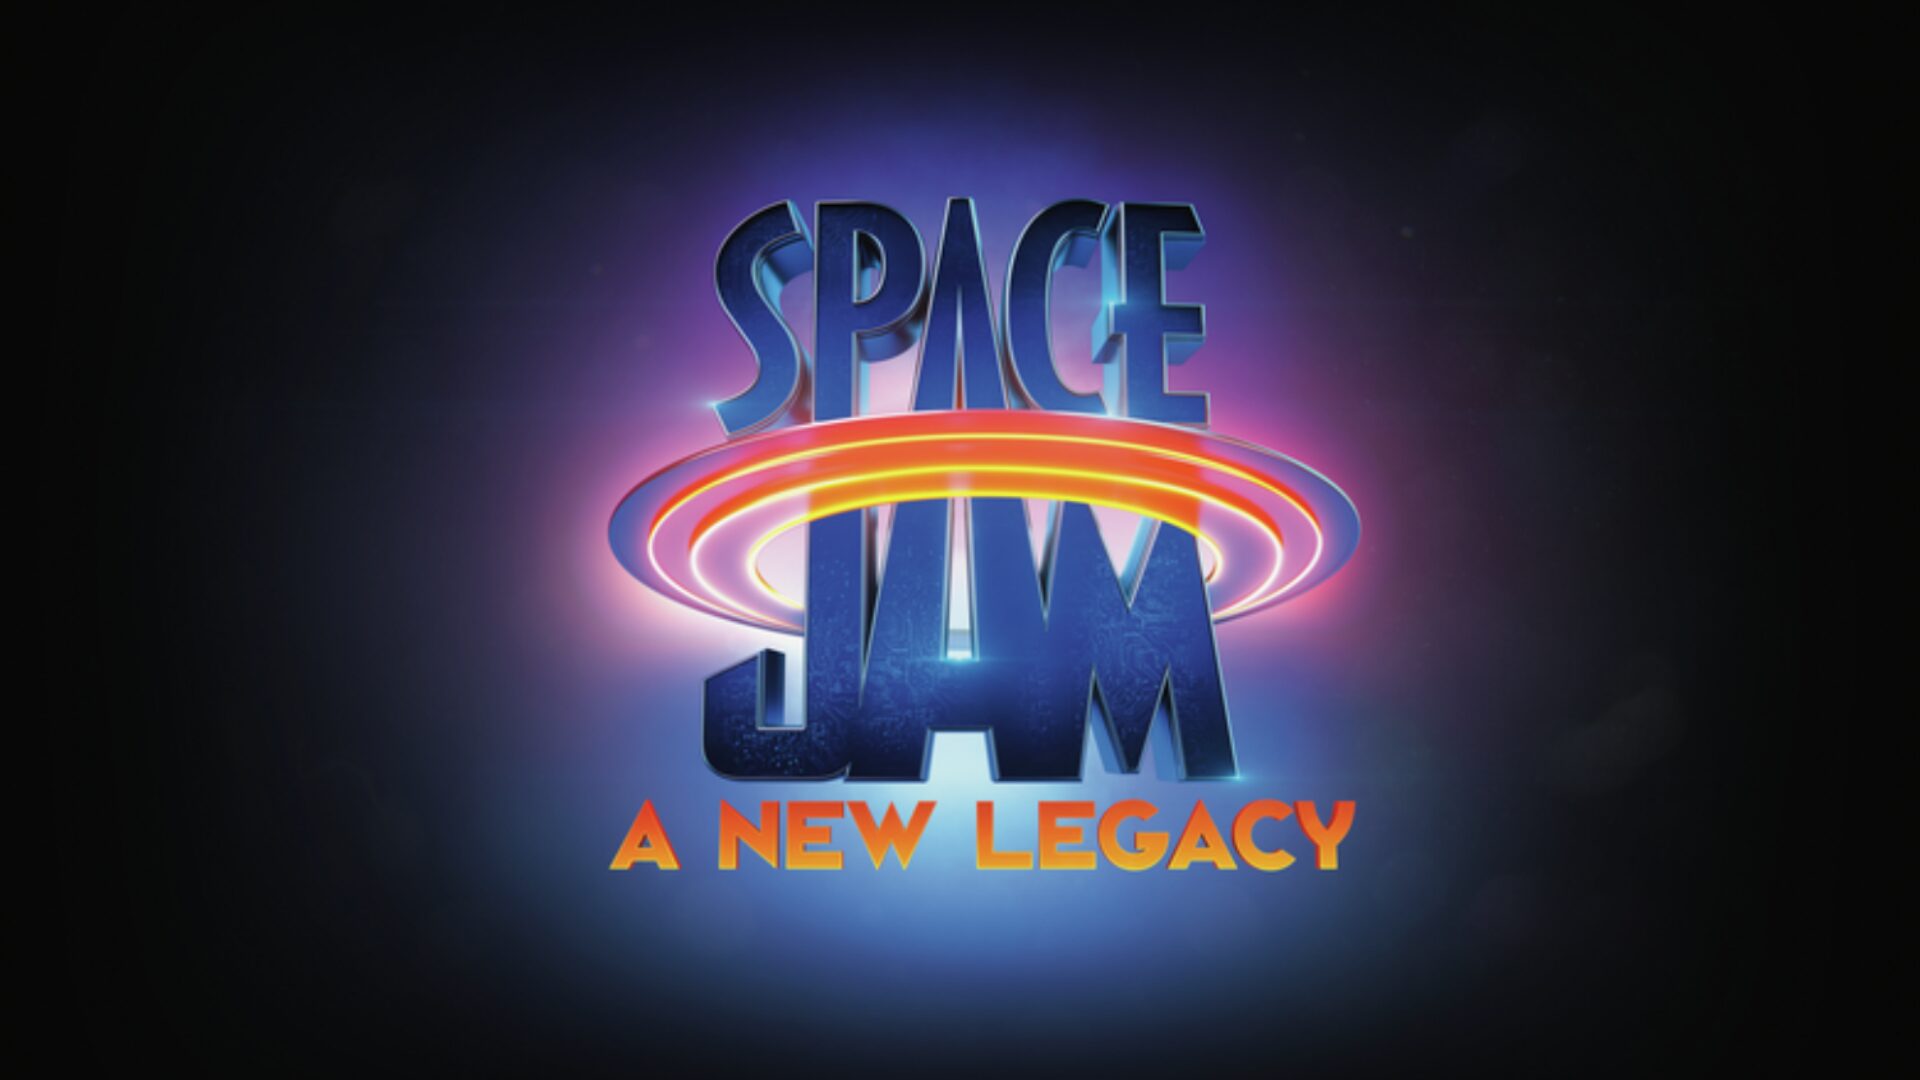 Space Jam Goodie Bag Competition Terms